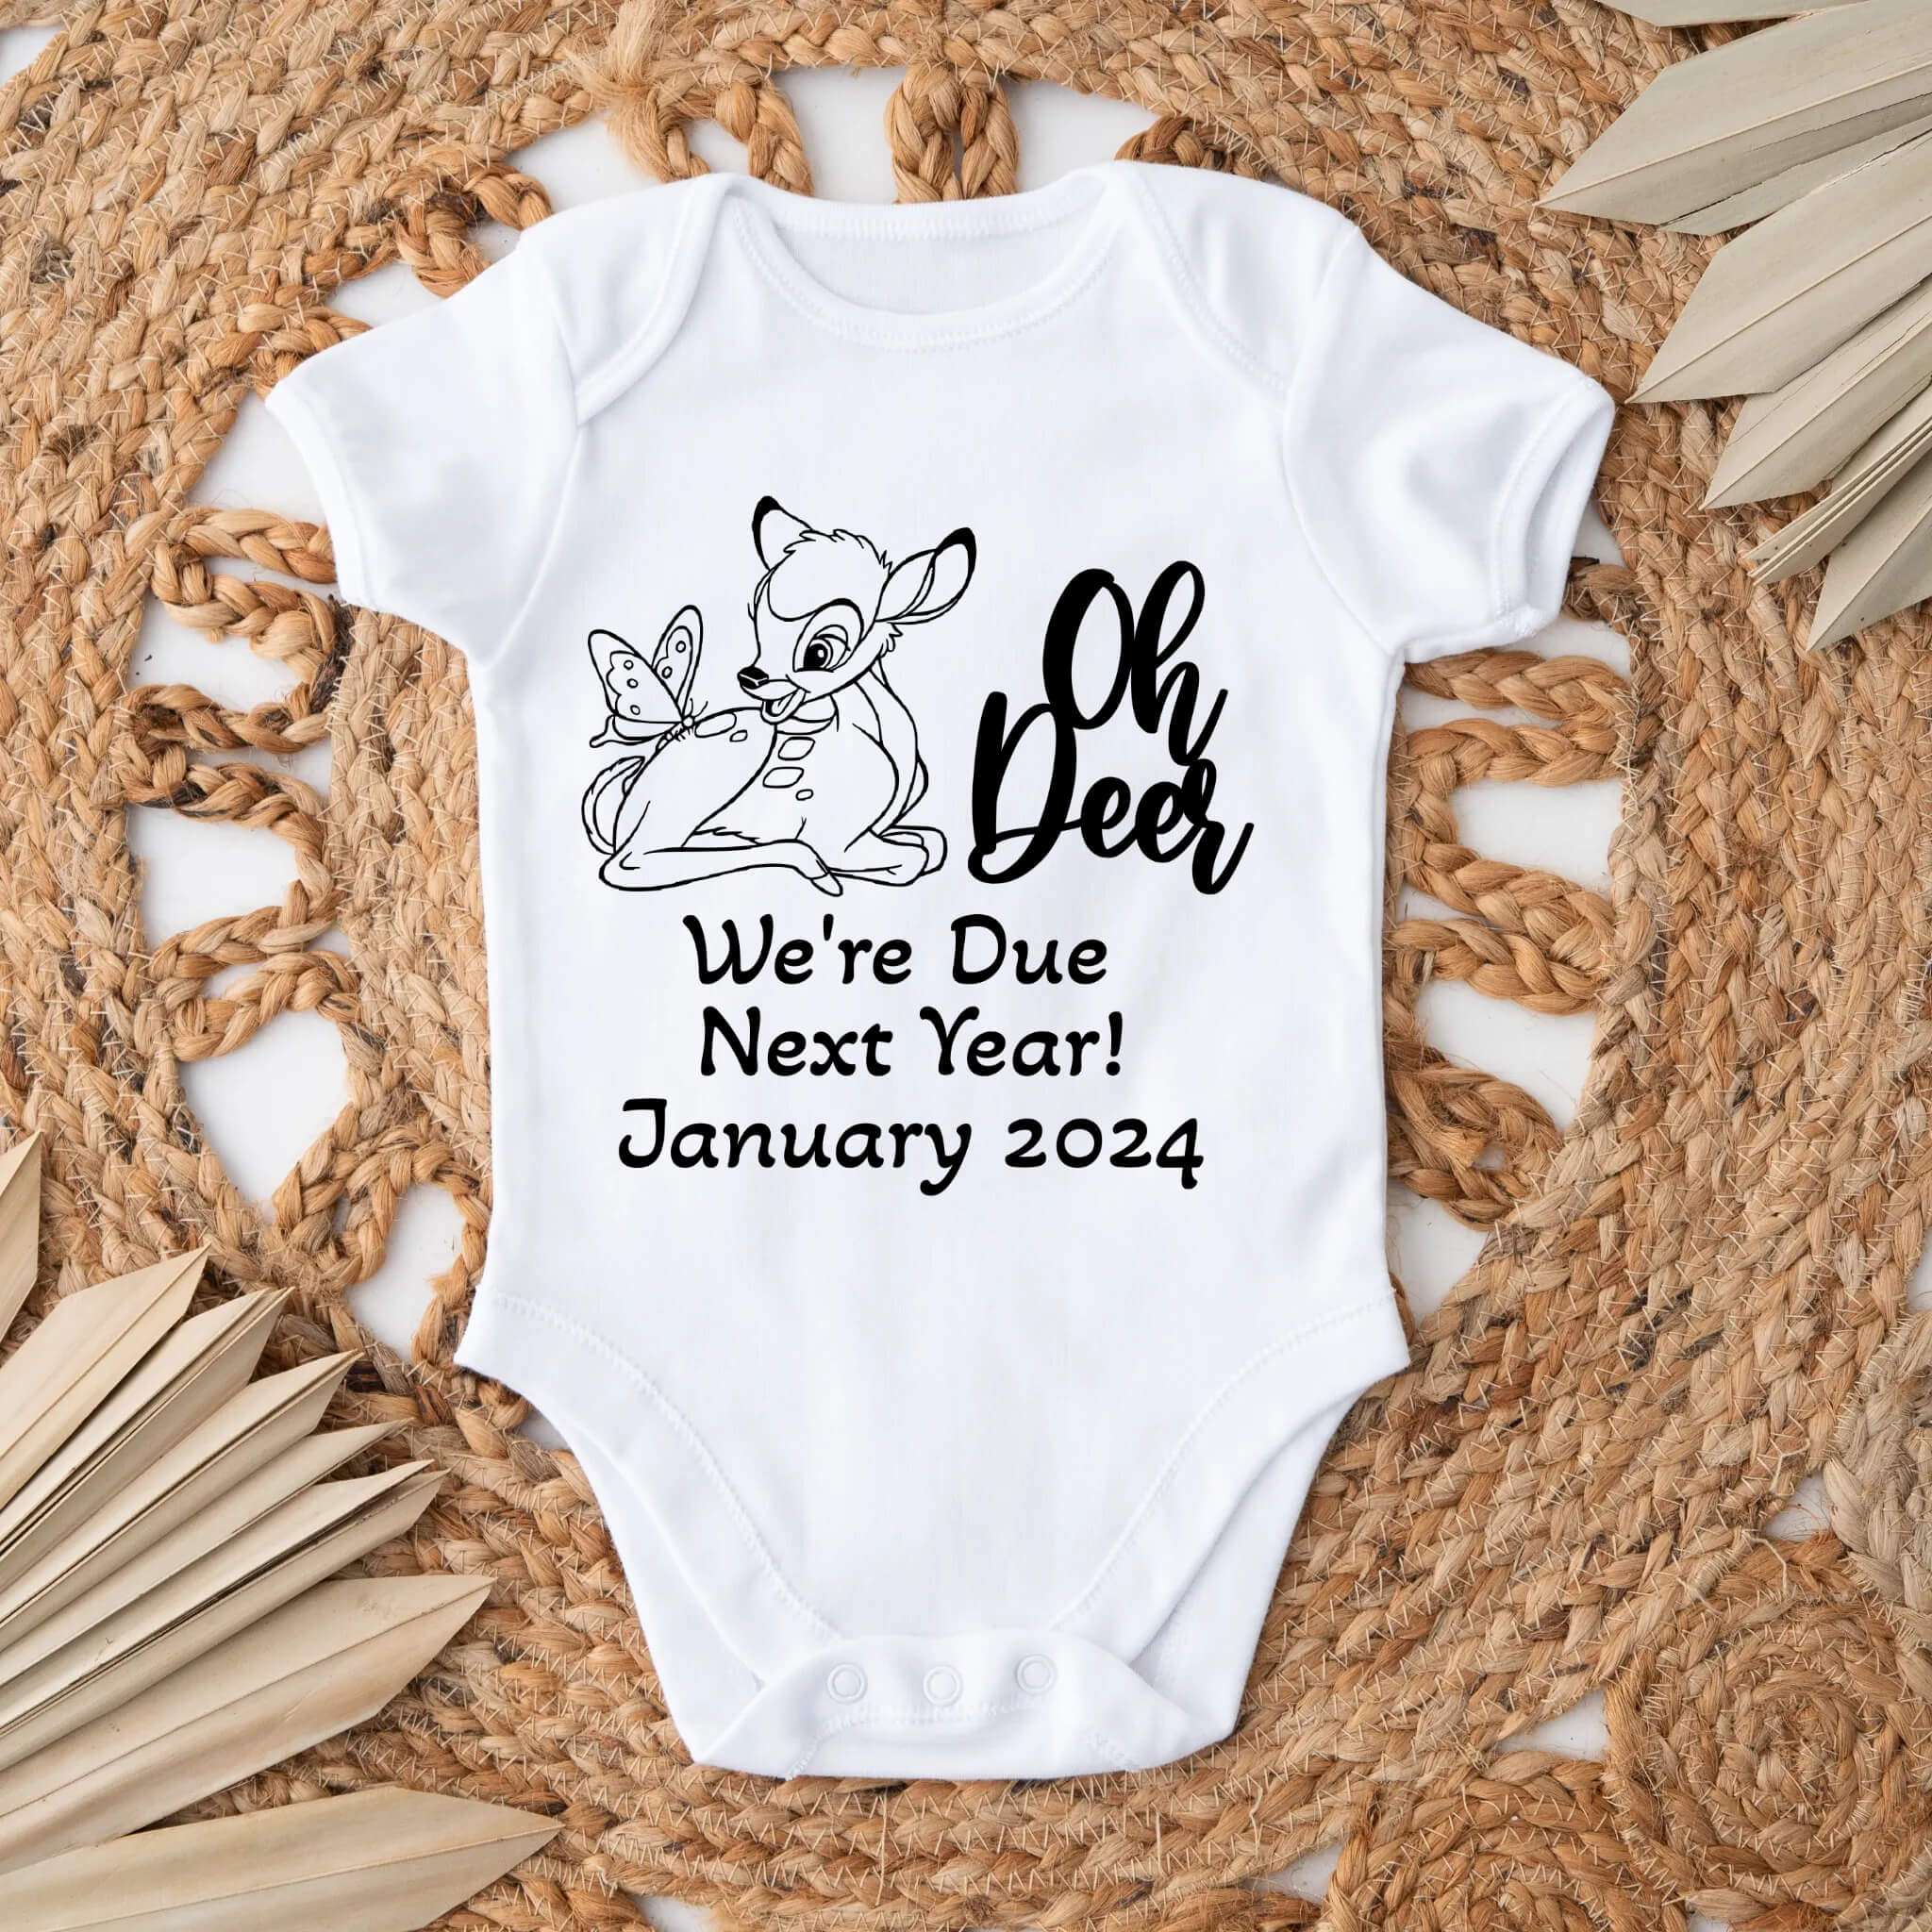 Personalized Pregnancy Announcement, Oh Deer We’re Due Next Year, Dad, Grandma, Grandpa, Aunt, Uncle To Be, Customized Baby Fawn Announcement, Social Media Announcement, Gift Box Baby Announcement, Animated Movie Characters Pregnancy Announcement